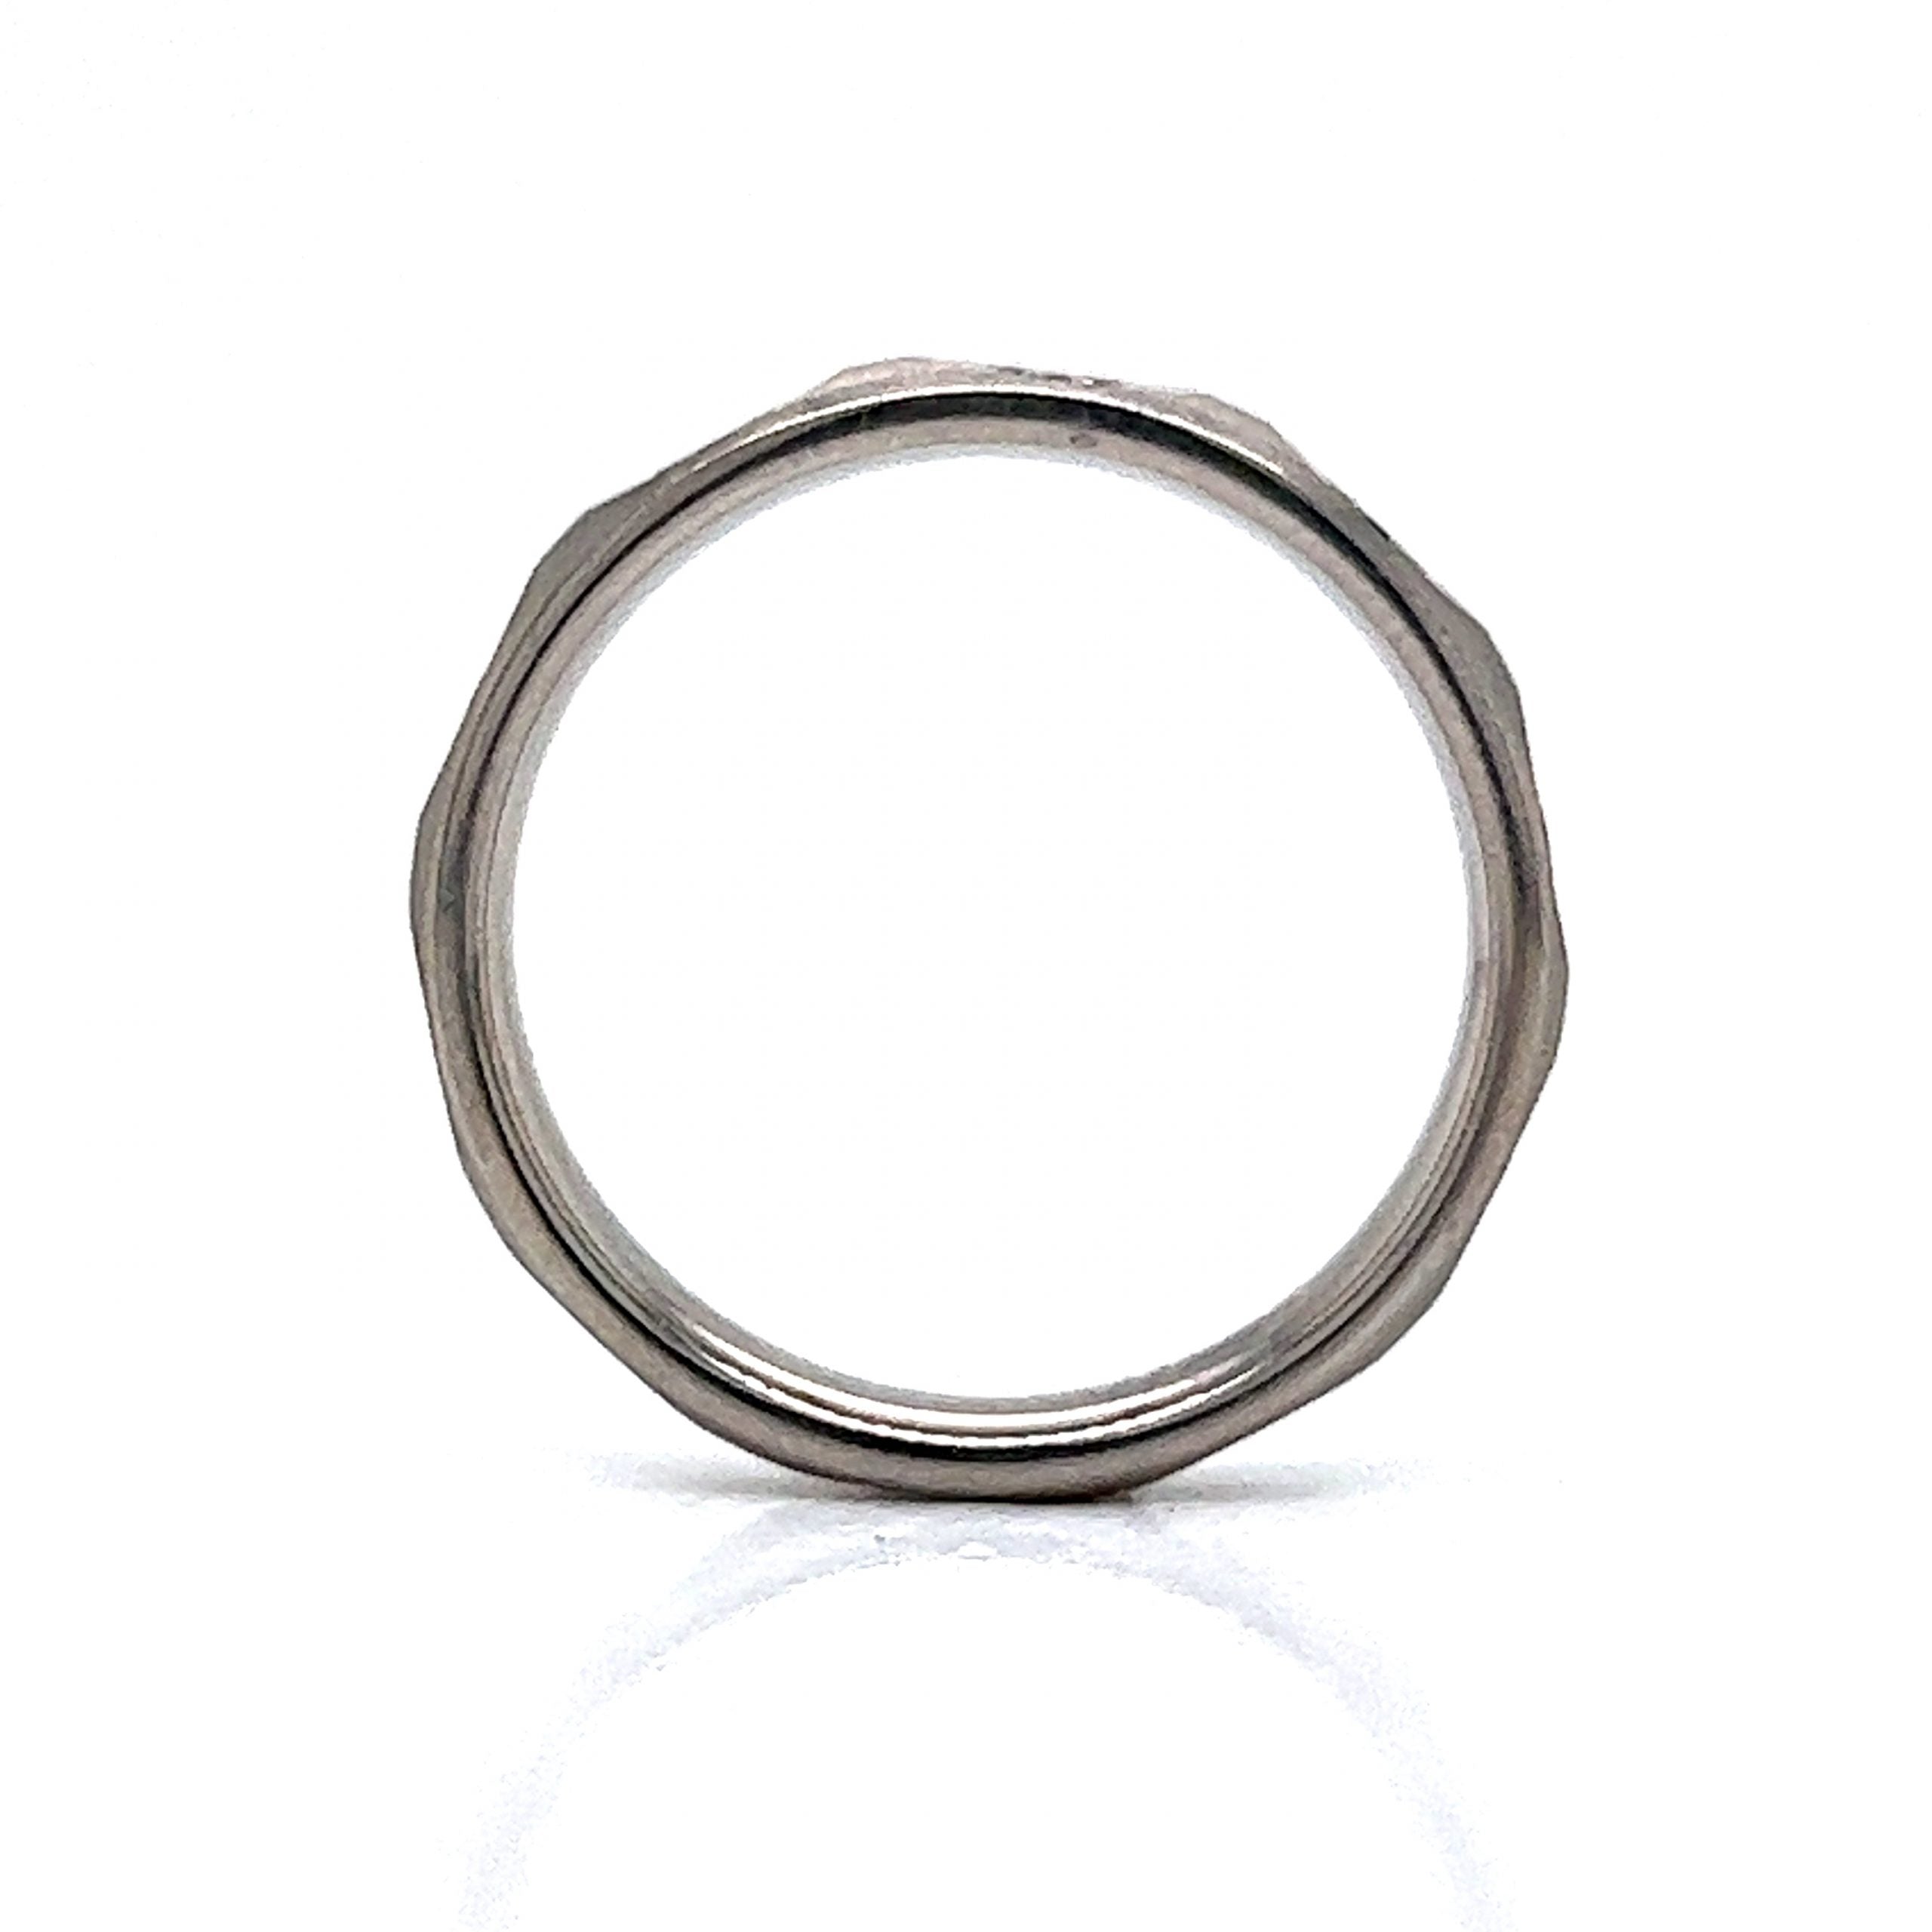 Nut Ring Polished Stainless Steel or Brushed Black Plated Ring Comfort Fit  4, 6 and 8mm Widths Available. Very Comfortable - Etsy | Stainless steel  rings, Brushed black, Comfort fit